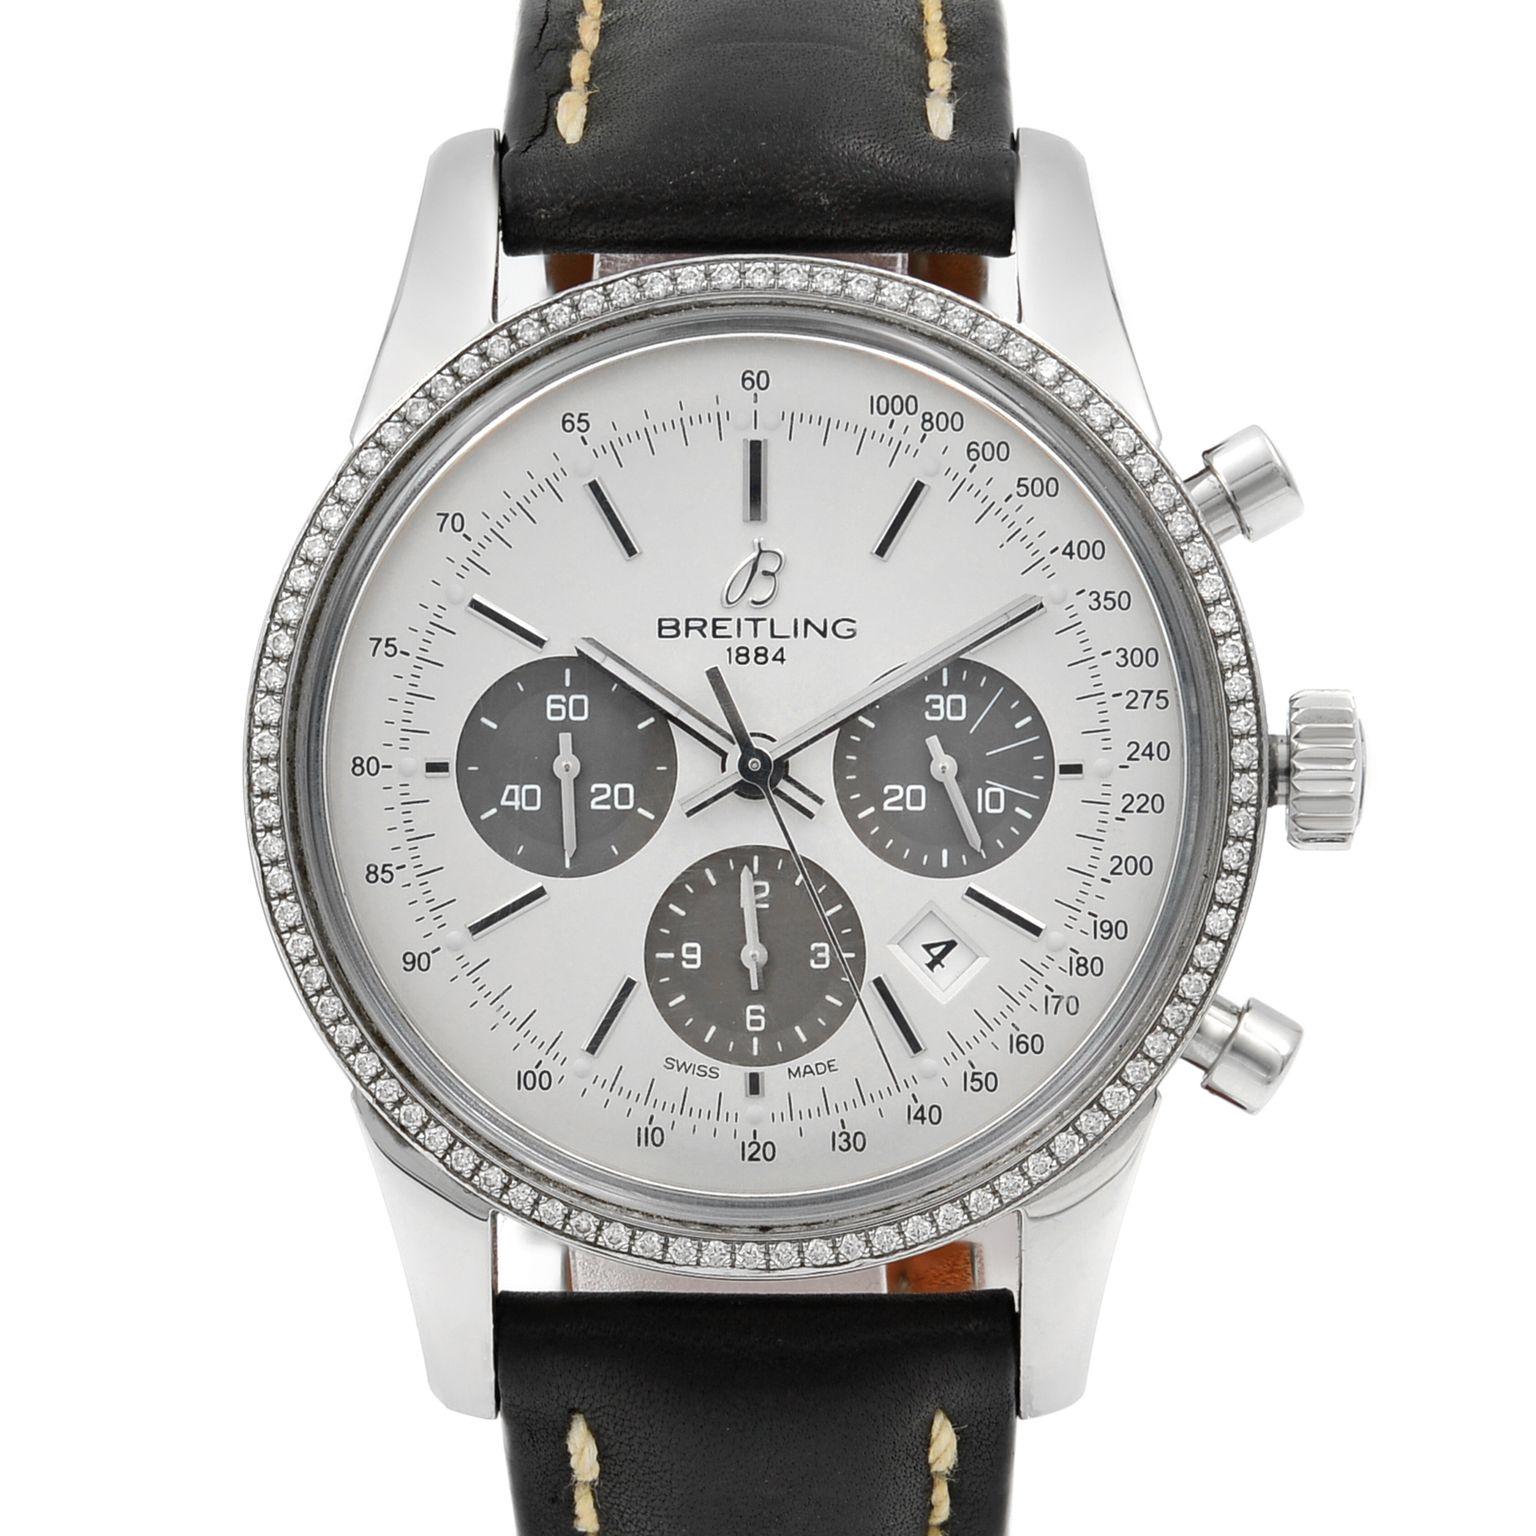 This pre-owned Breitling Transocean AB015253/G724 is a beautiful men's timepiece that is powered by a mechanical (automatic) movement which is cased in a stainless steel case. It has a round shape face, chronograph, chronograph hand, diamonds, small